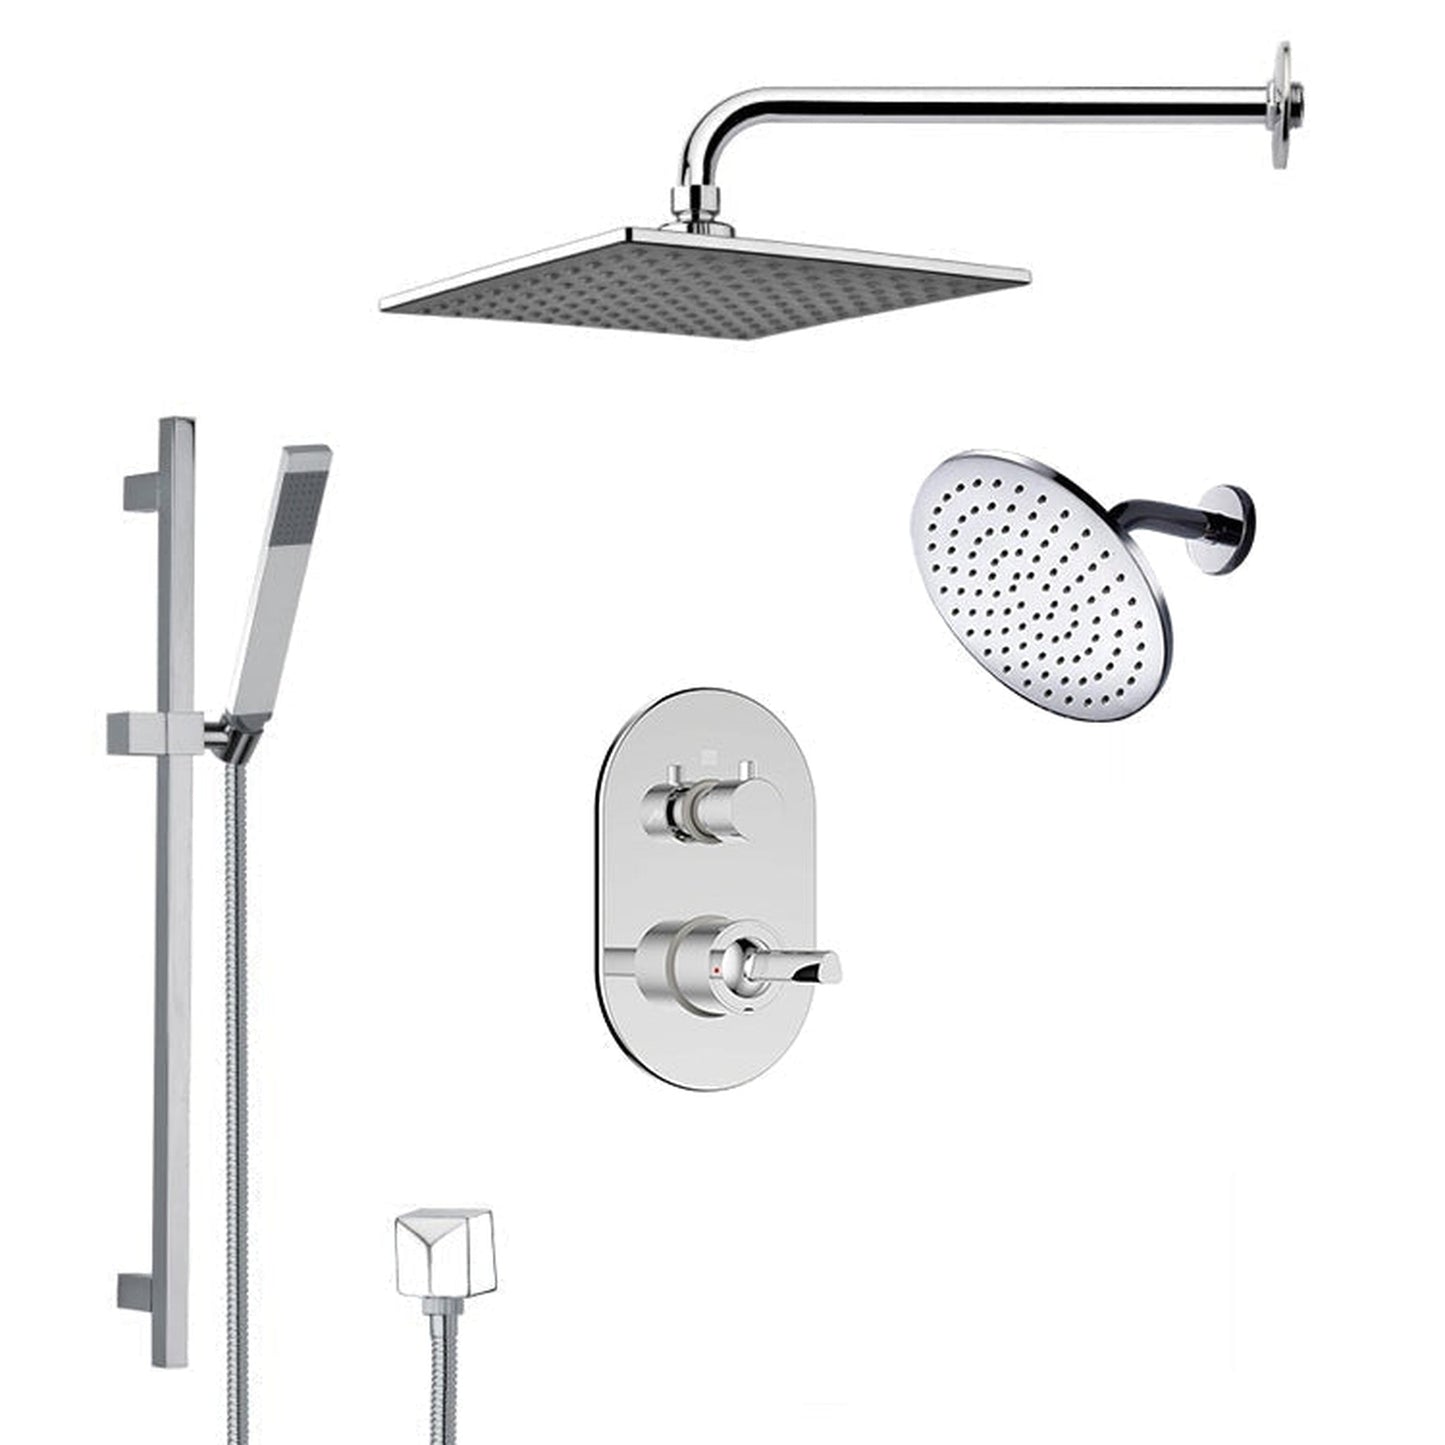 FontanaShowers Deluxe Designers 16" Chrome Square & Big Round Dual Shower Head Rainfall Shower System With Slide Bar and Hand Shower